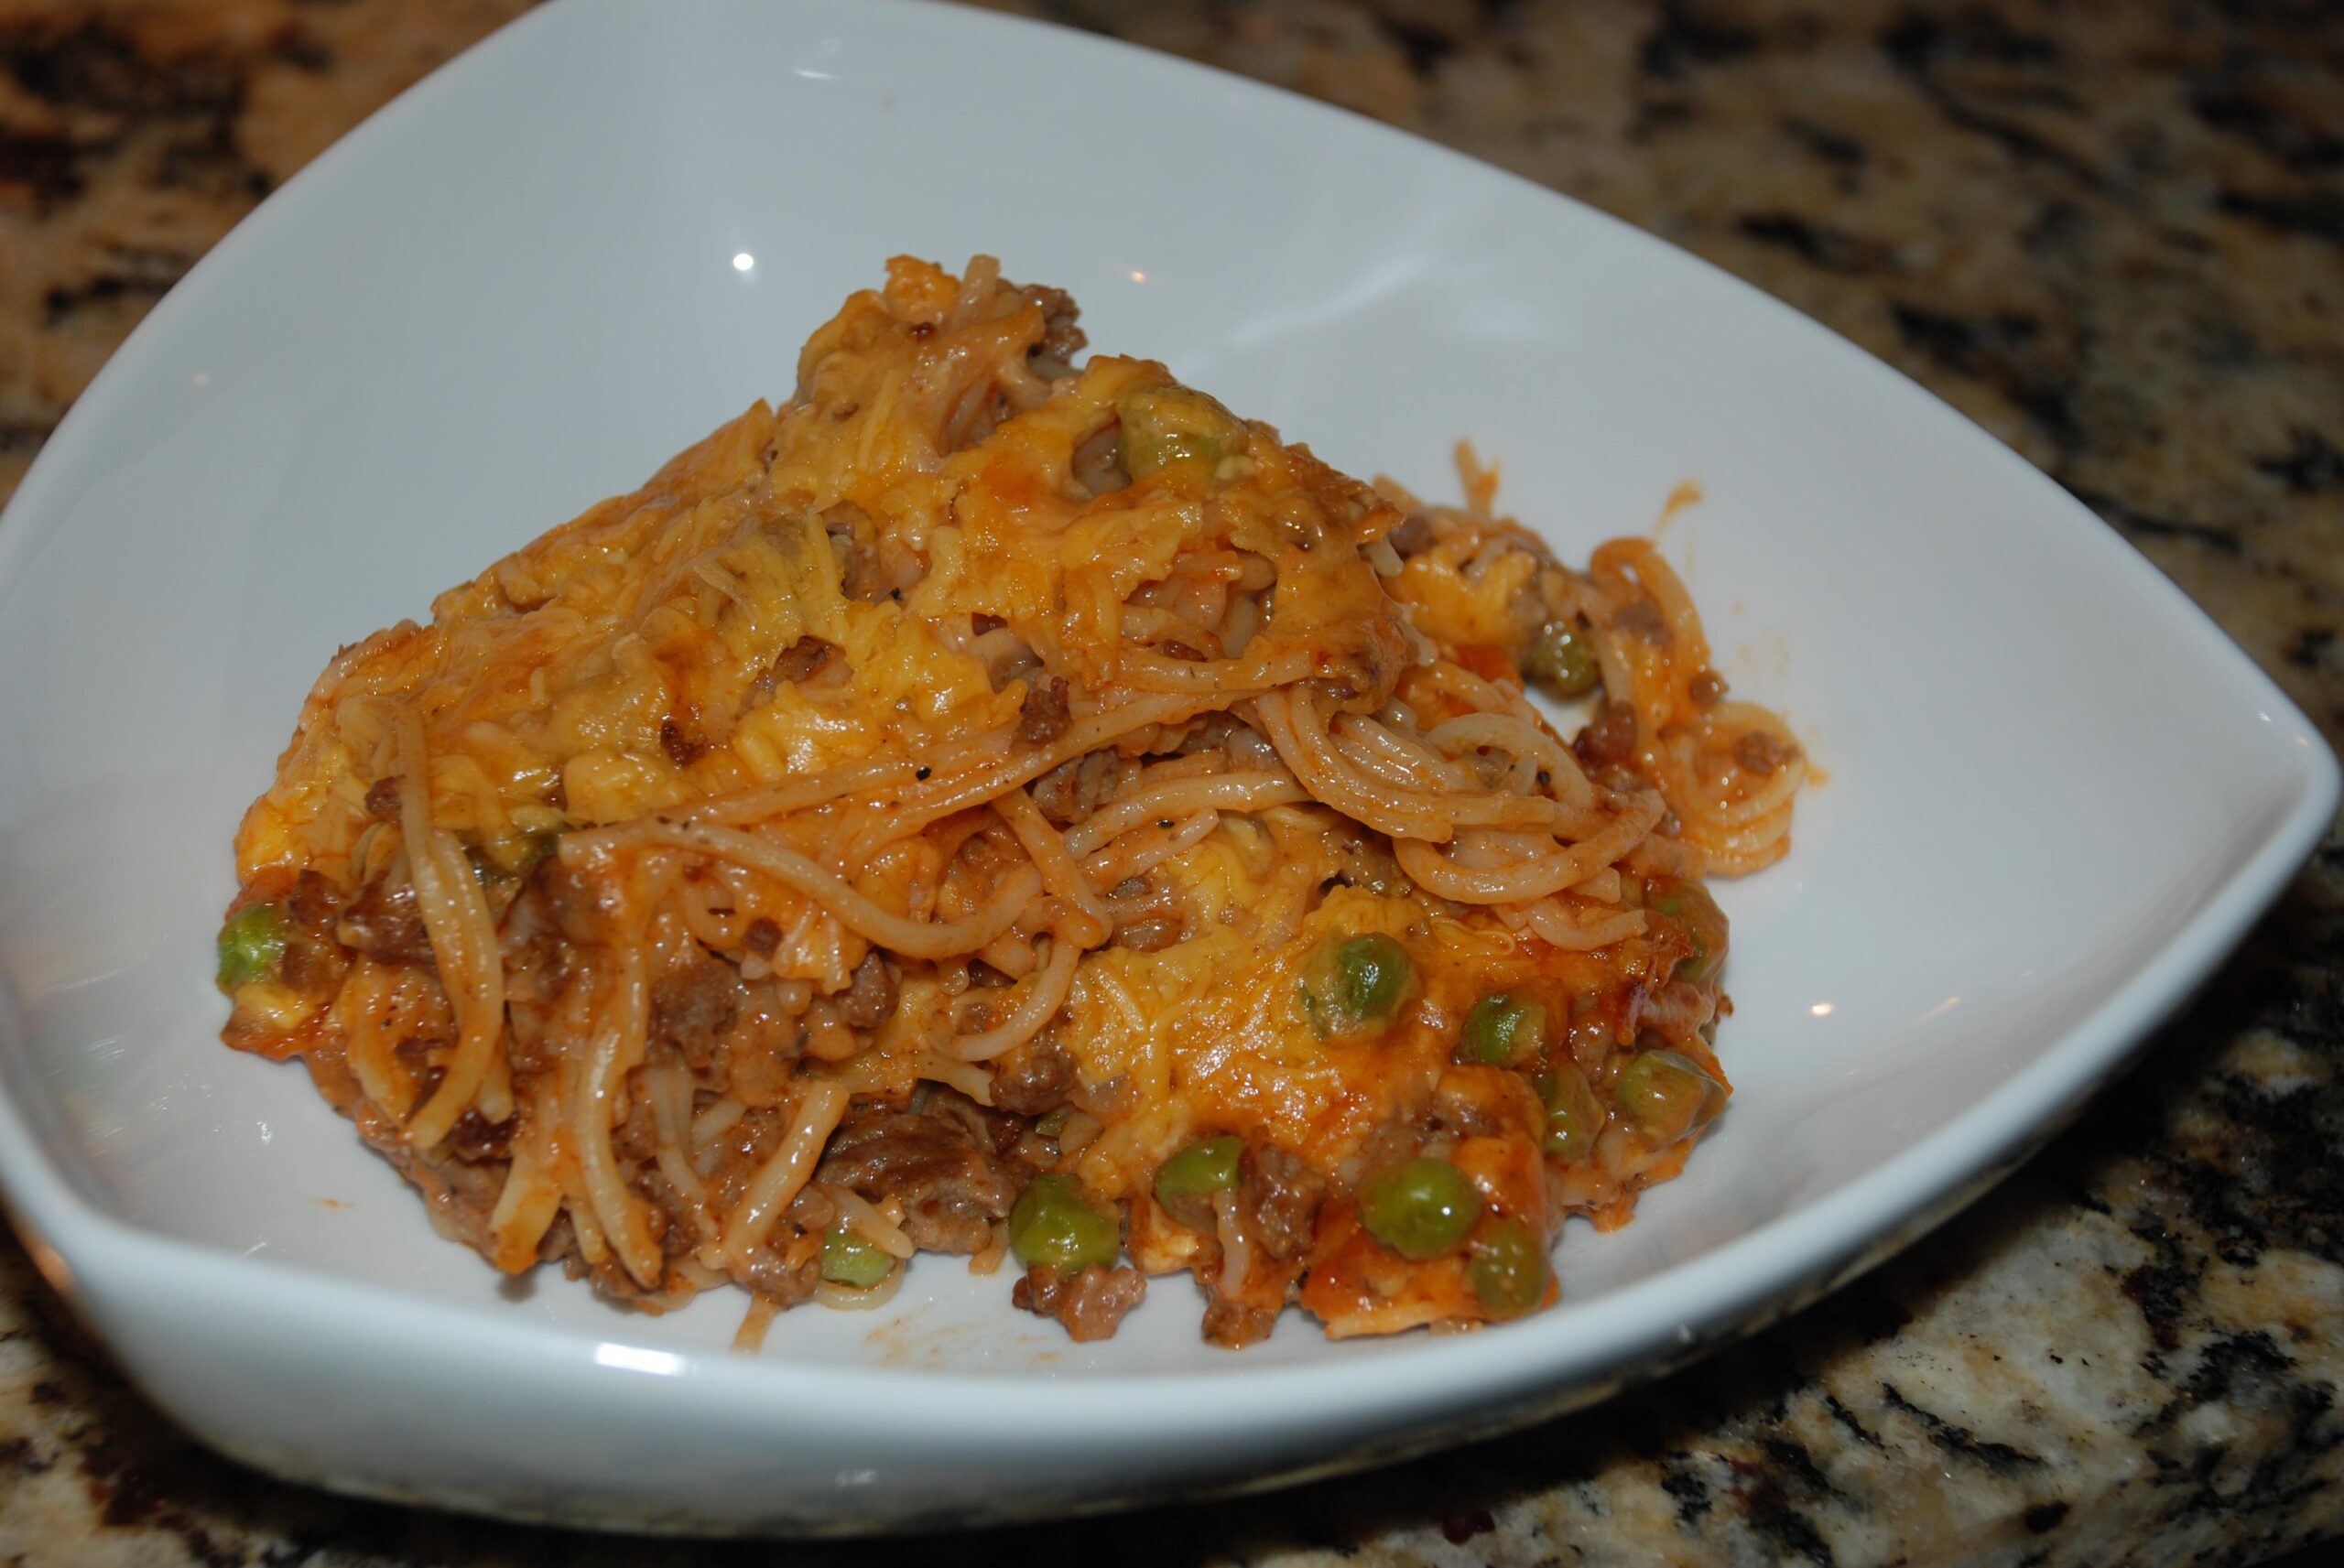  Golden and savory – meet the Southern Spaghetti Pie!